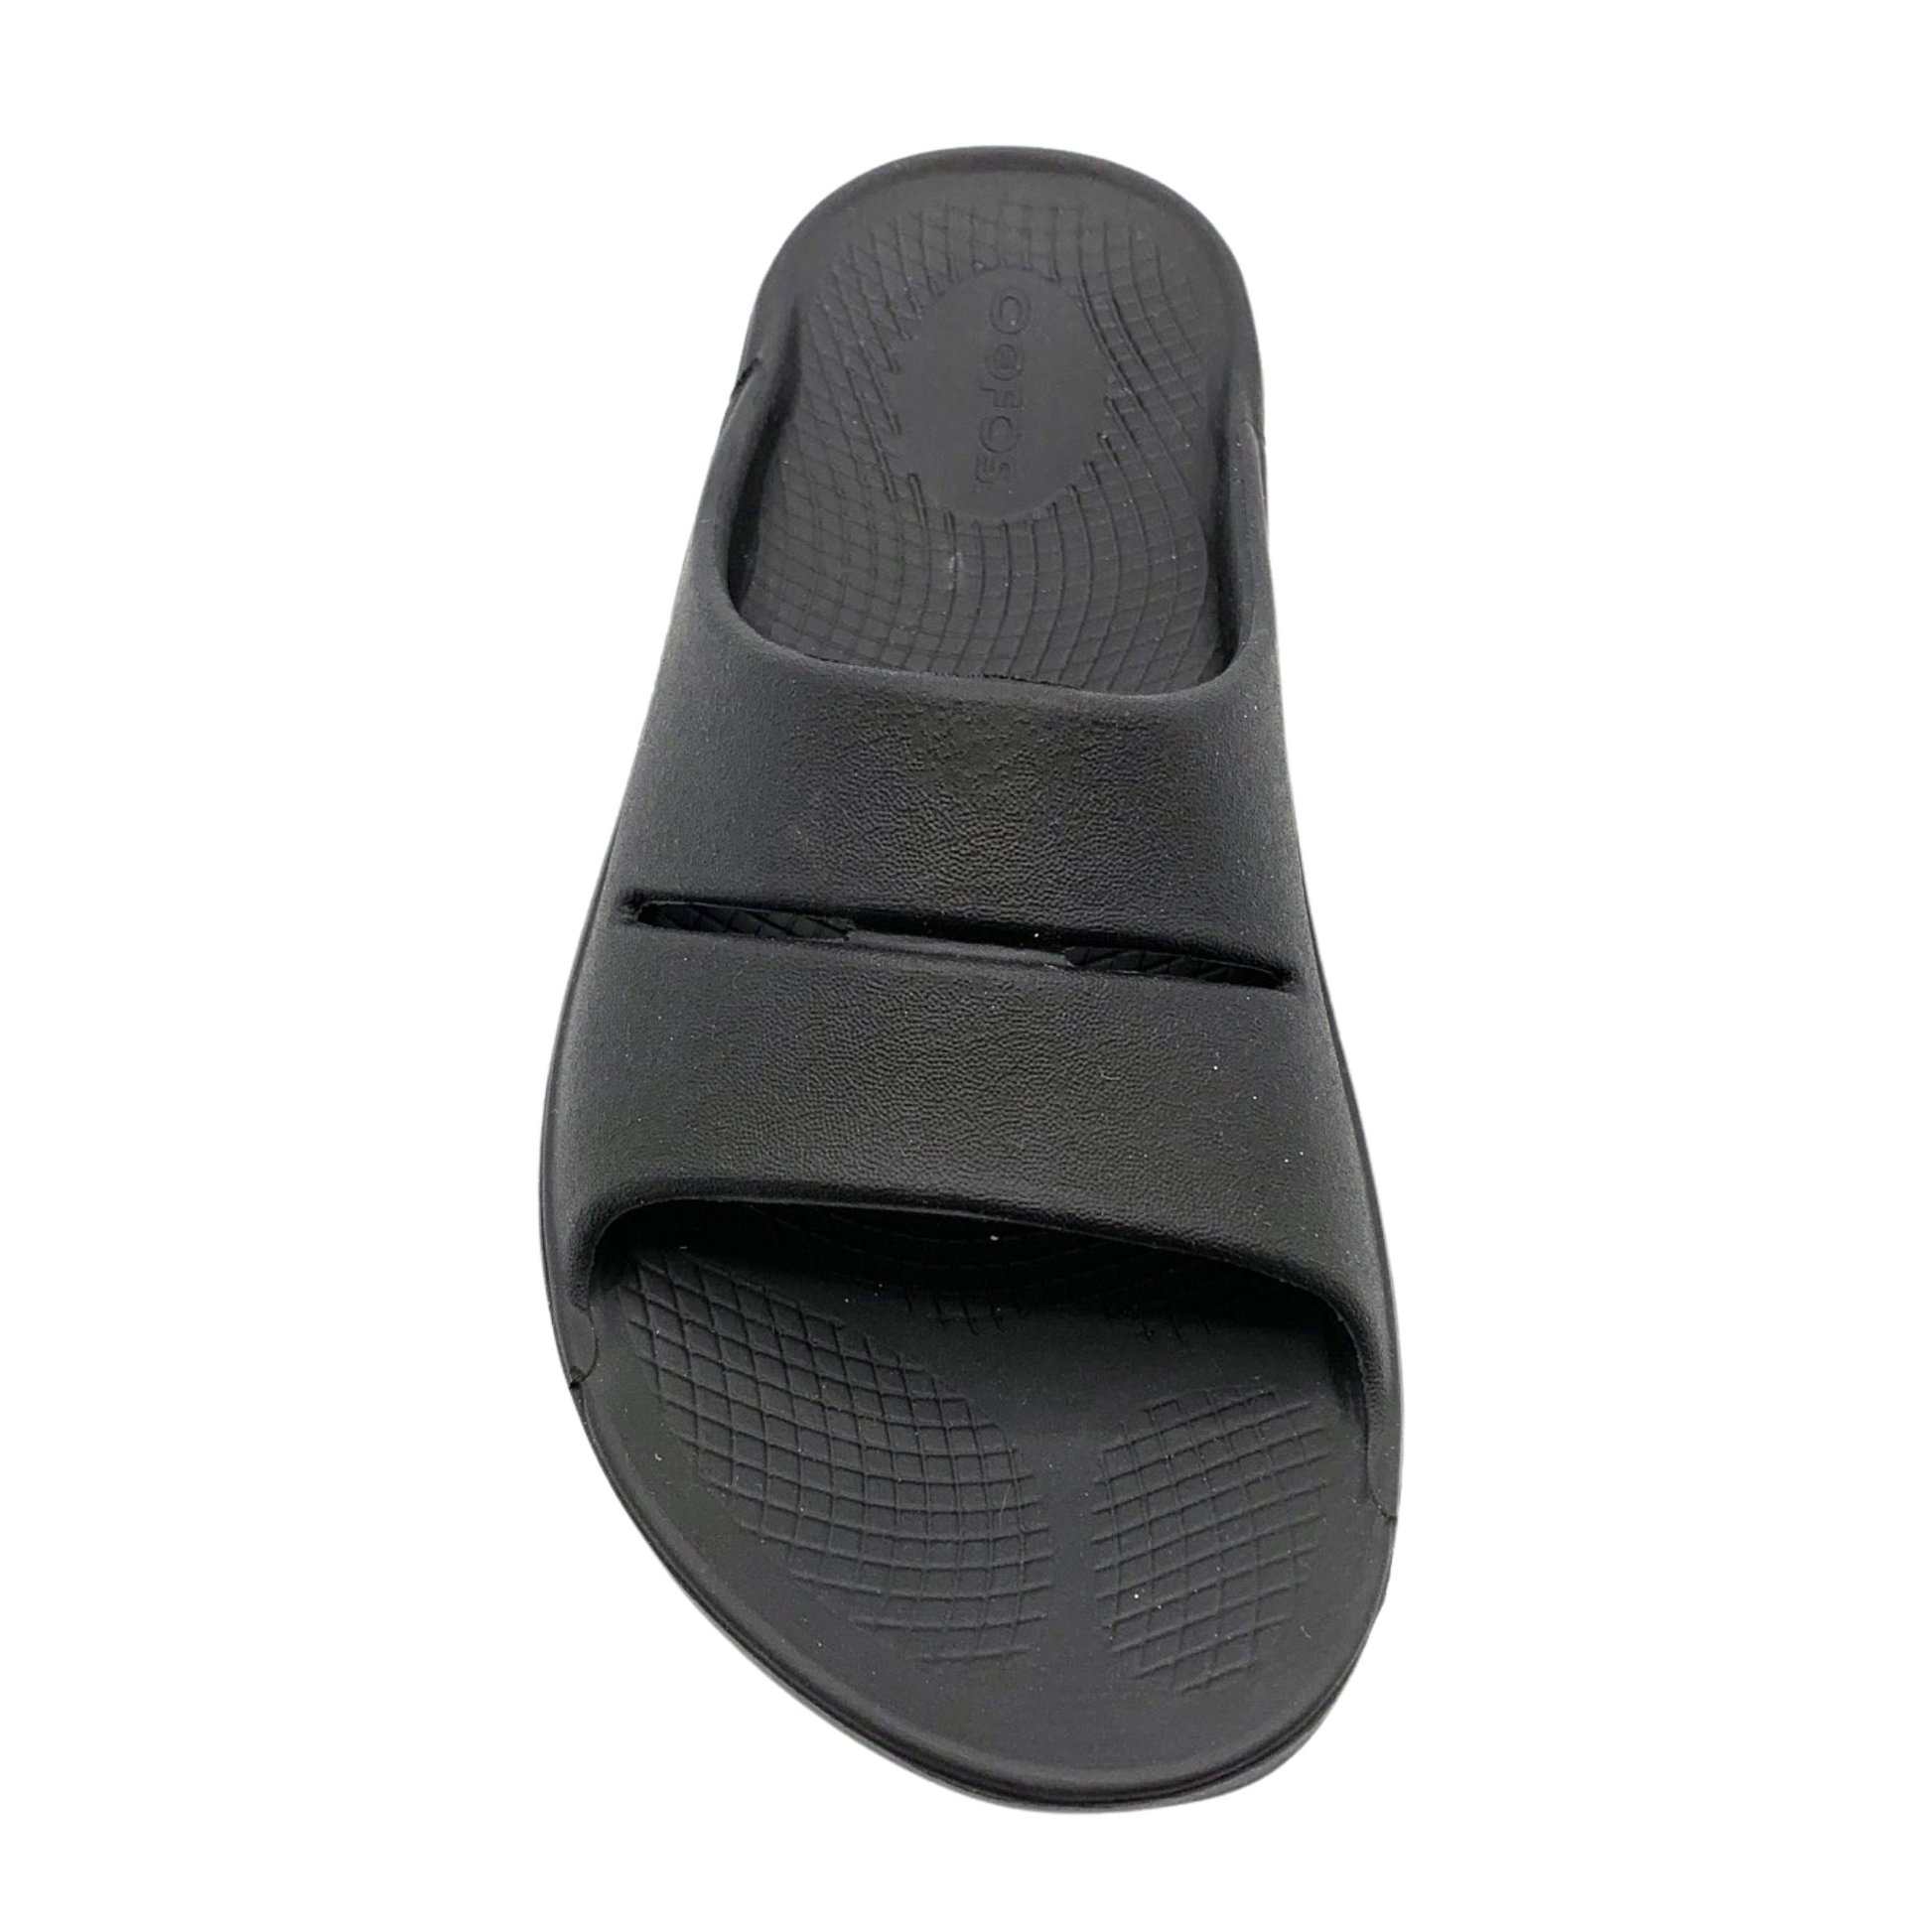 A top view of a black foam slide with two over-foot straps and a grippy sole.